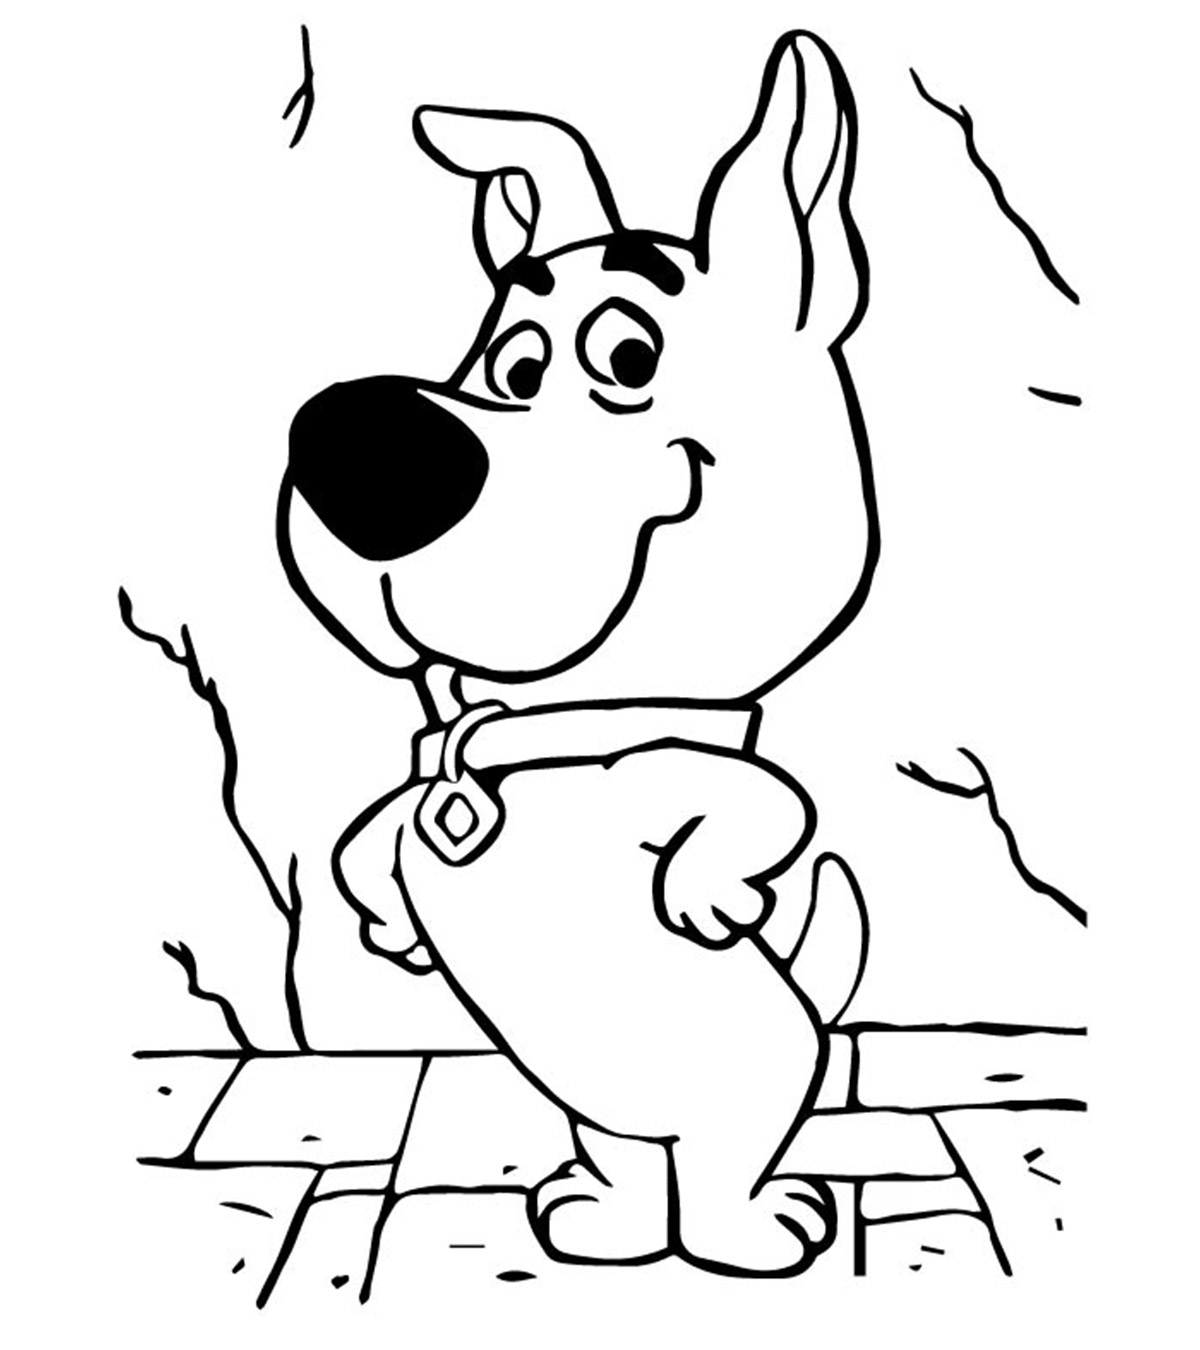 Top 30 Scooby Doo Coloring Pages For Your Little Ones_image